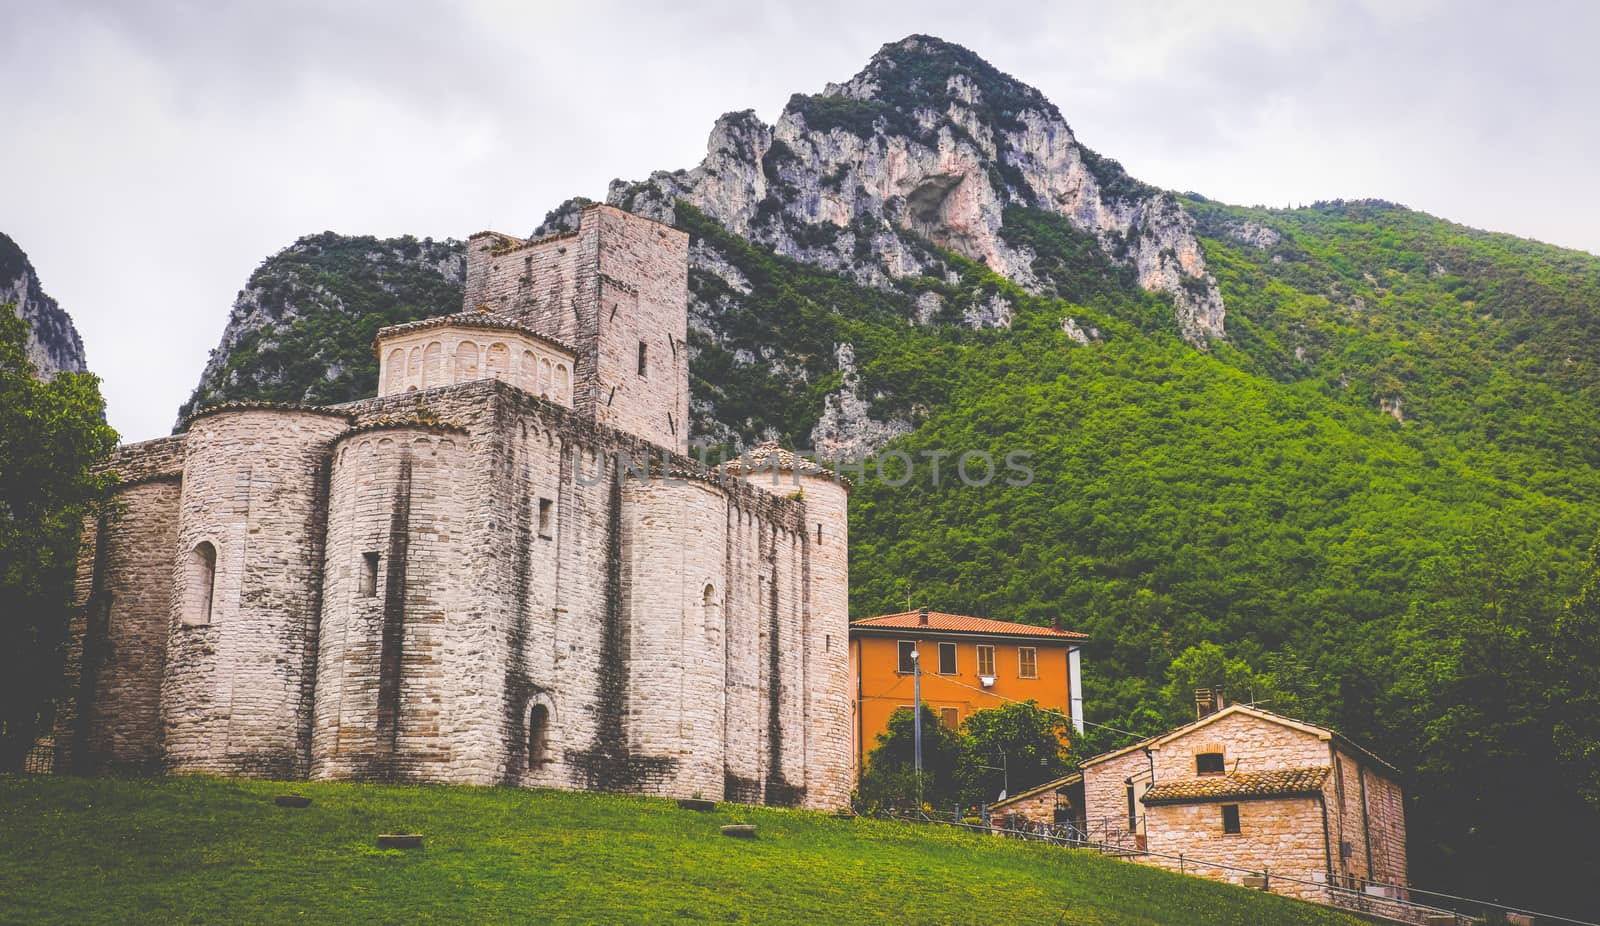 mountain abbey of San Vittore in Marche region - Italy by LucaLorenzelli